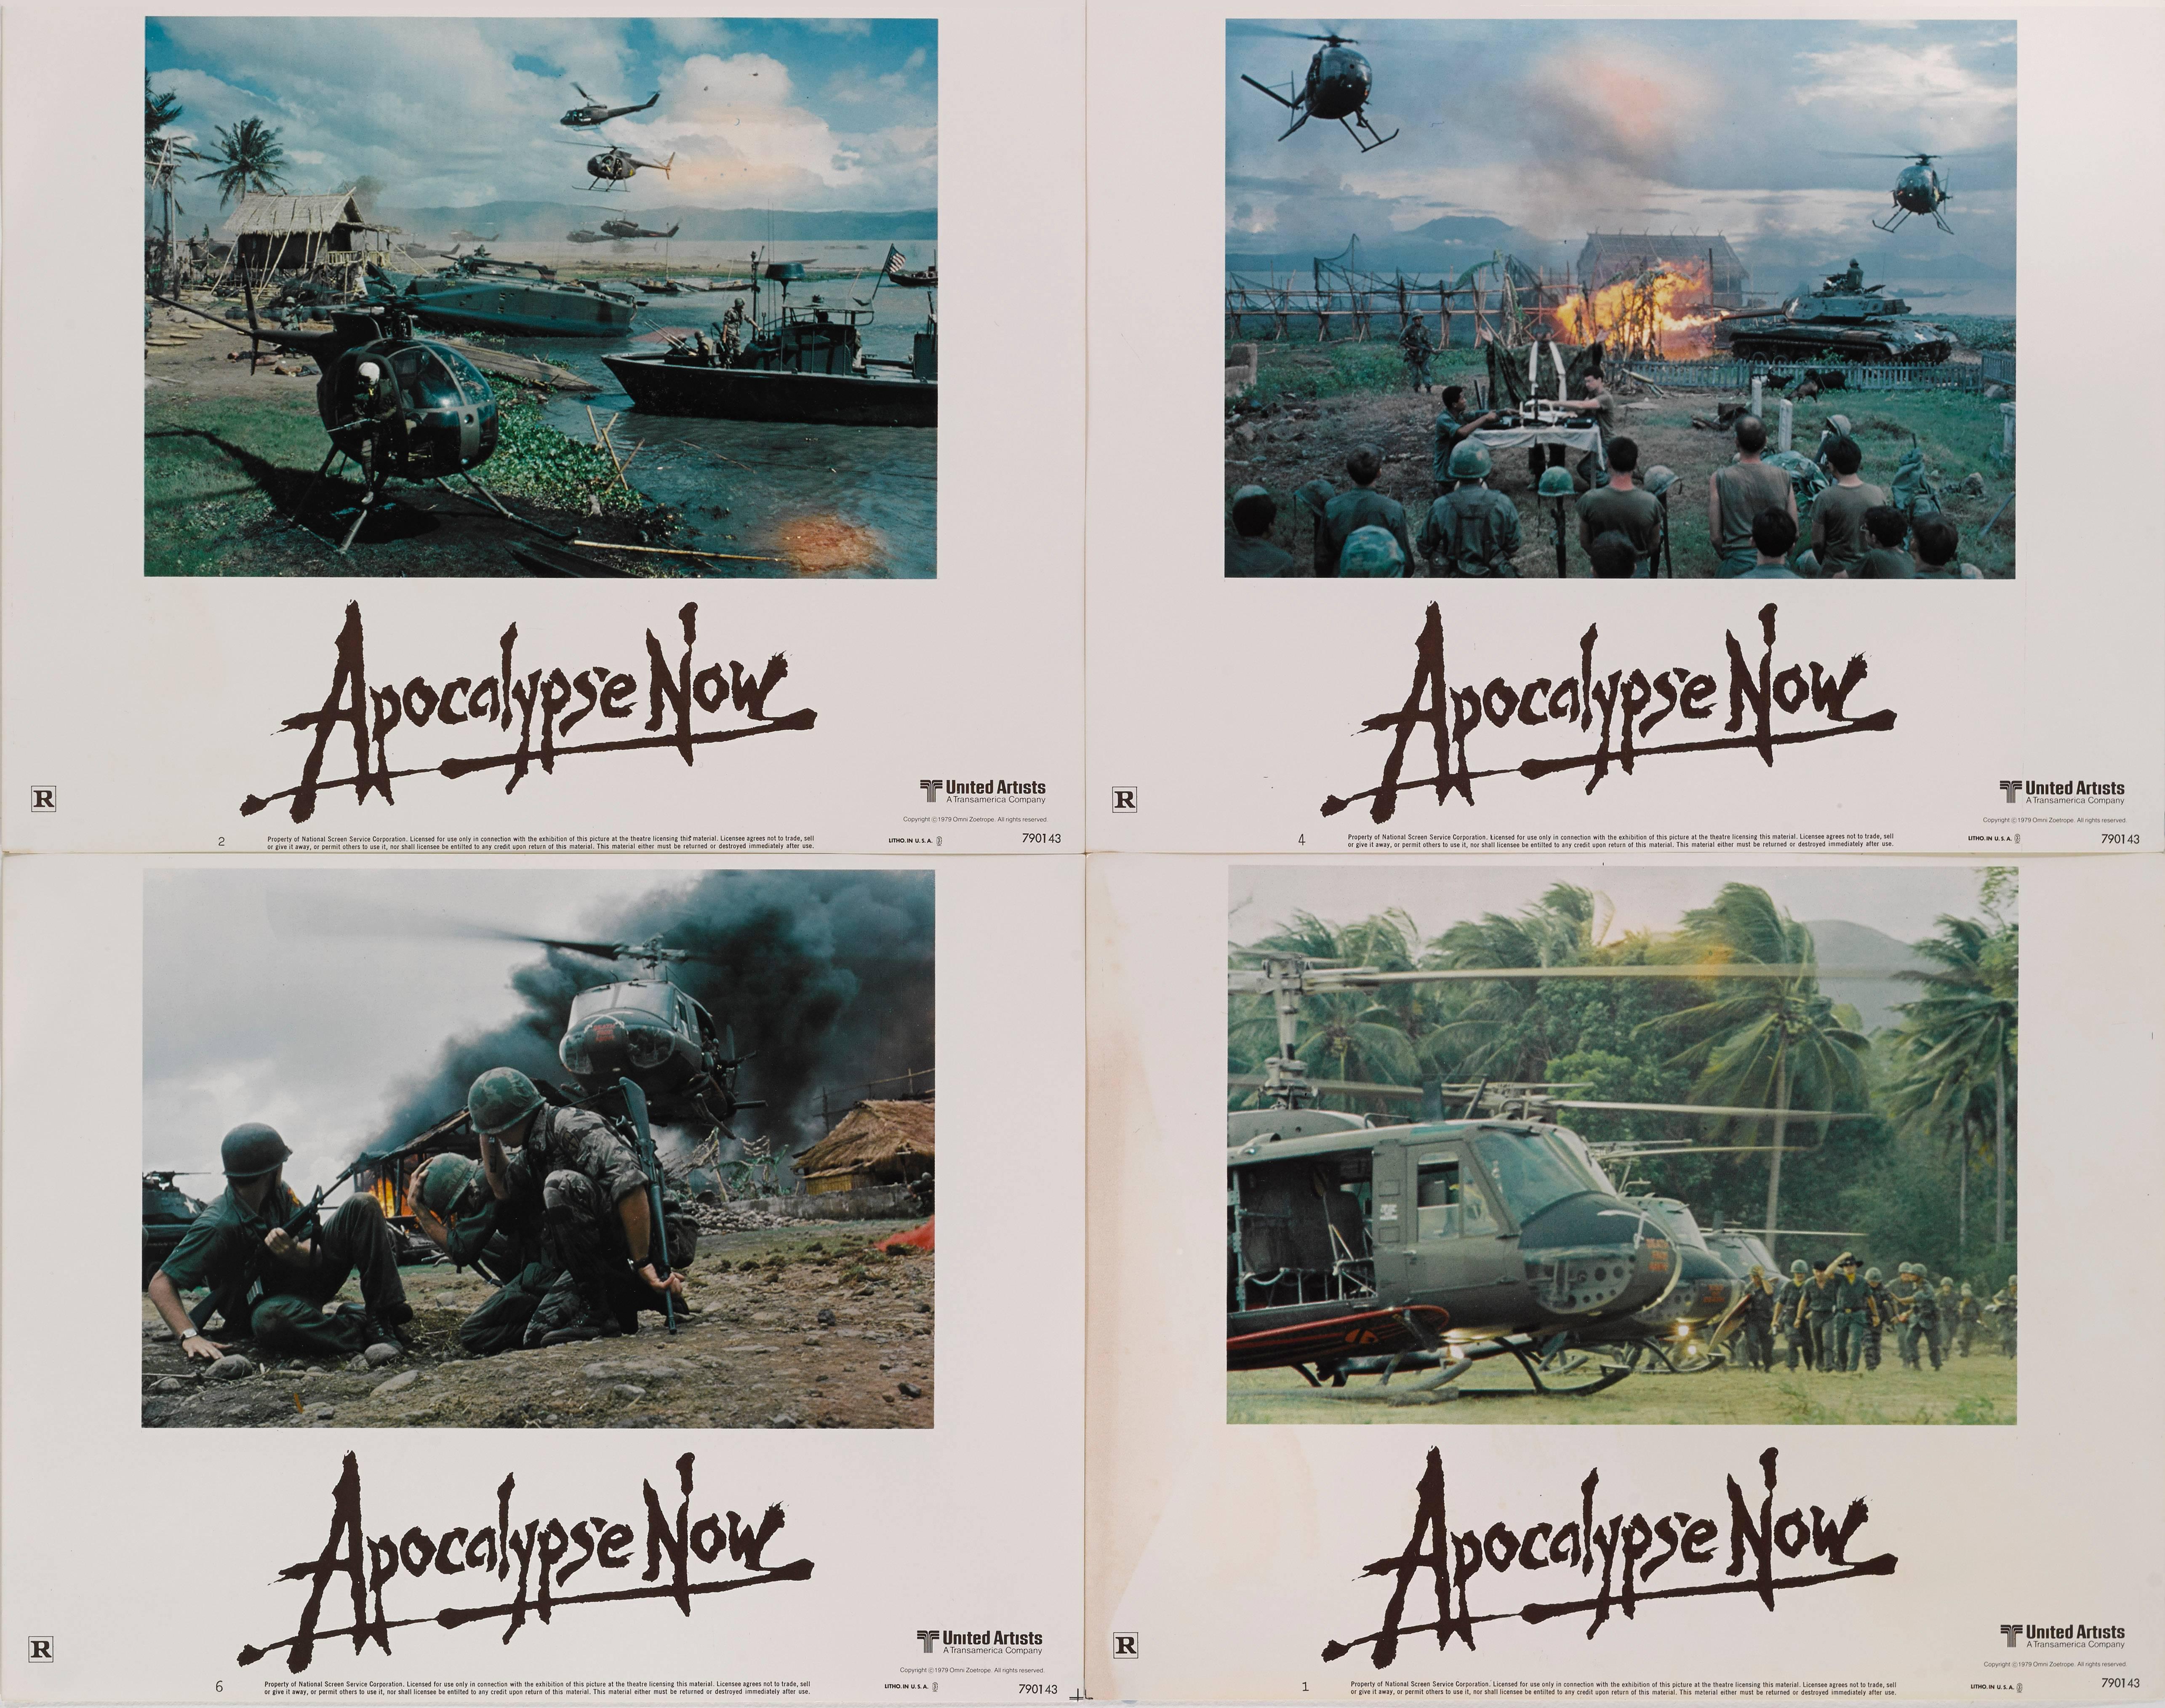 Apocalypse Now original US movie poster for Marlon Brando, Martin Sheen and Robert Duvall's Classic, 1979 Vietnam film directed by Francis Ford Coppola.
 